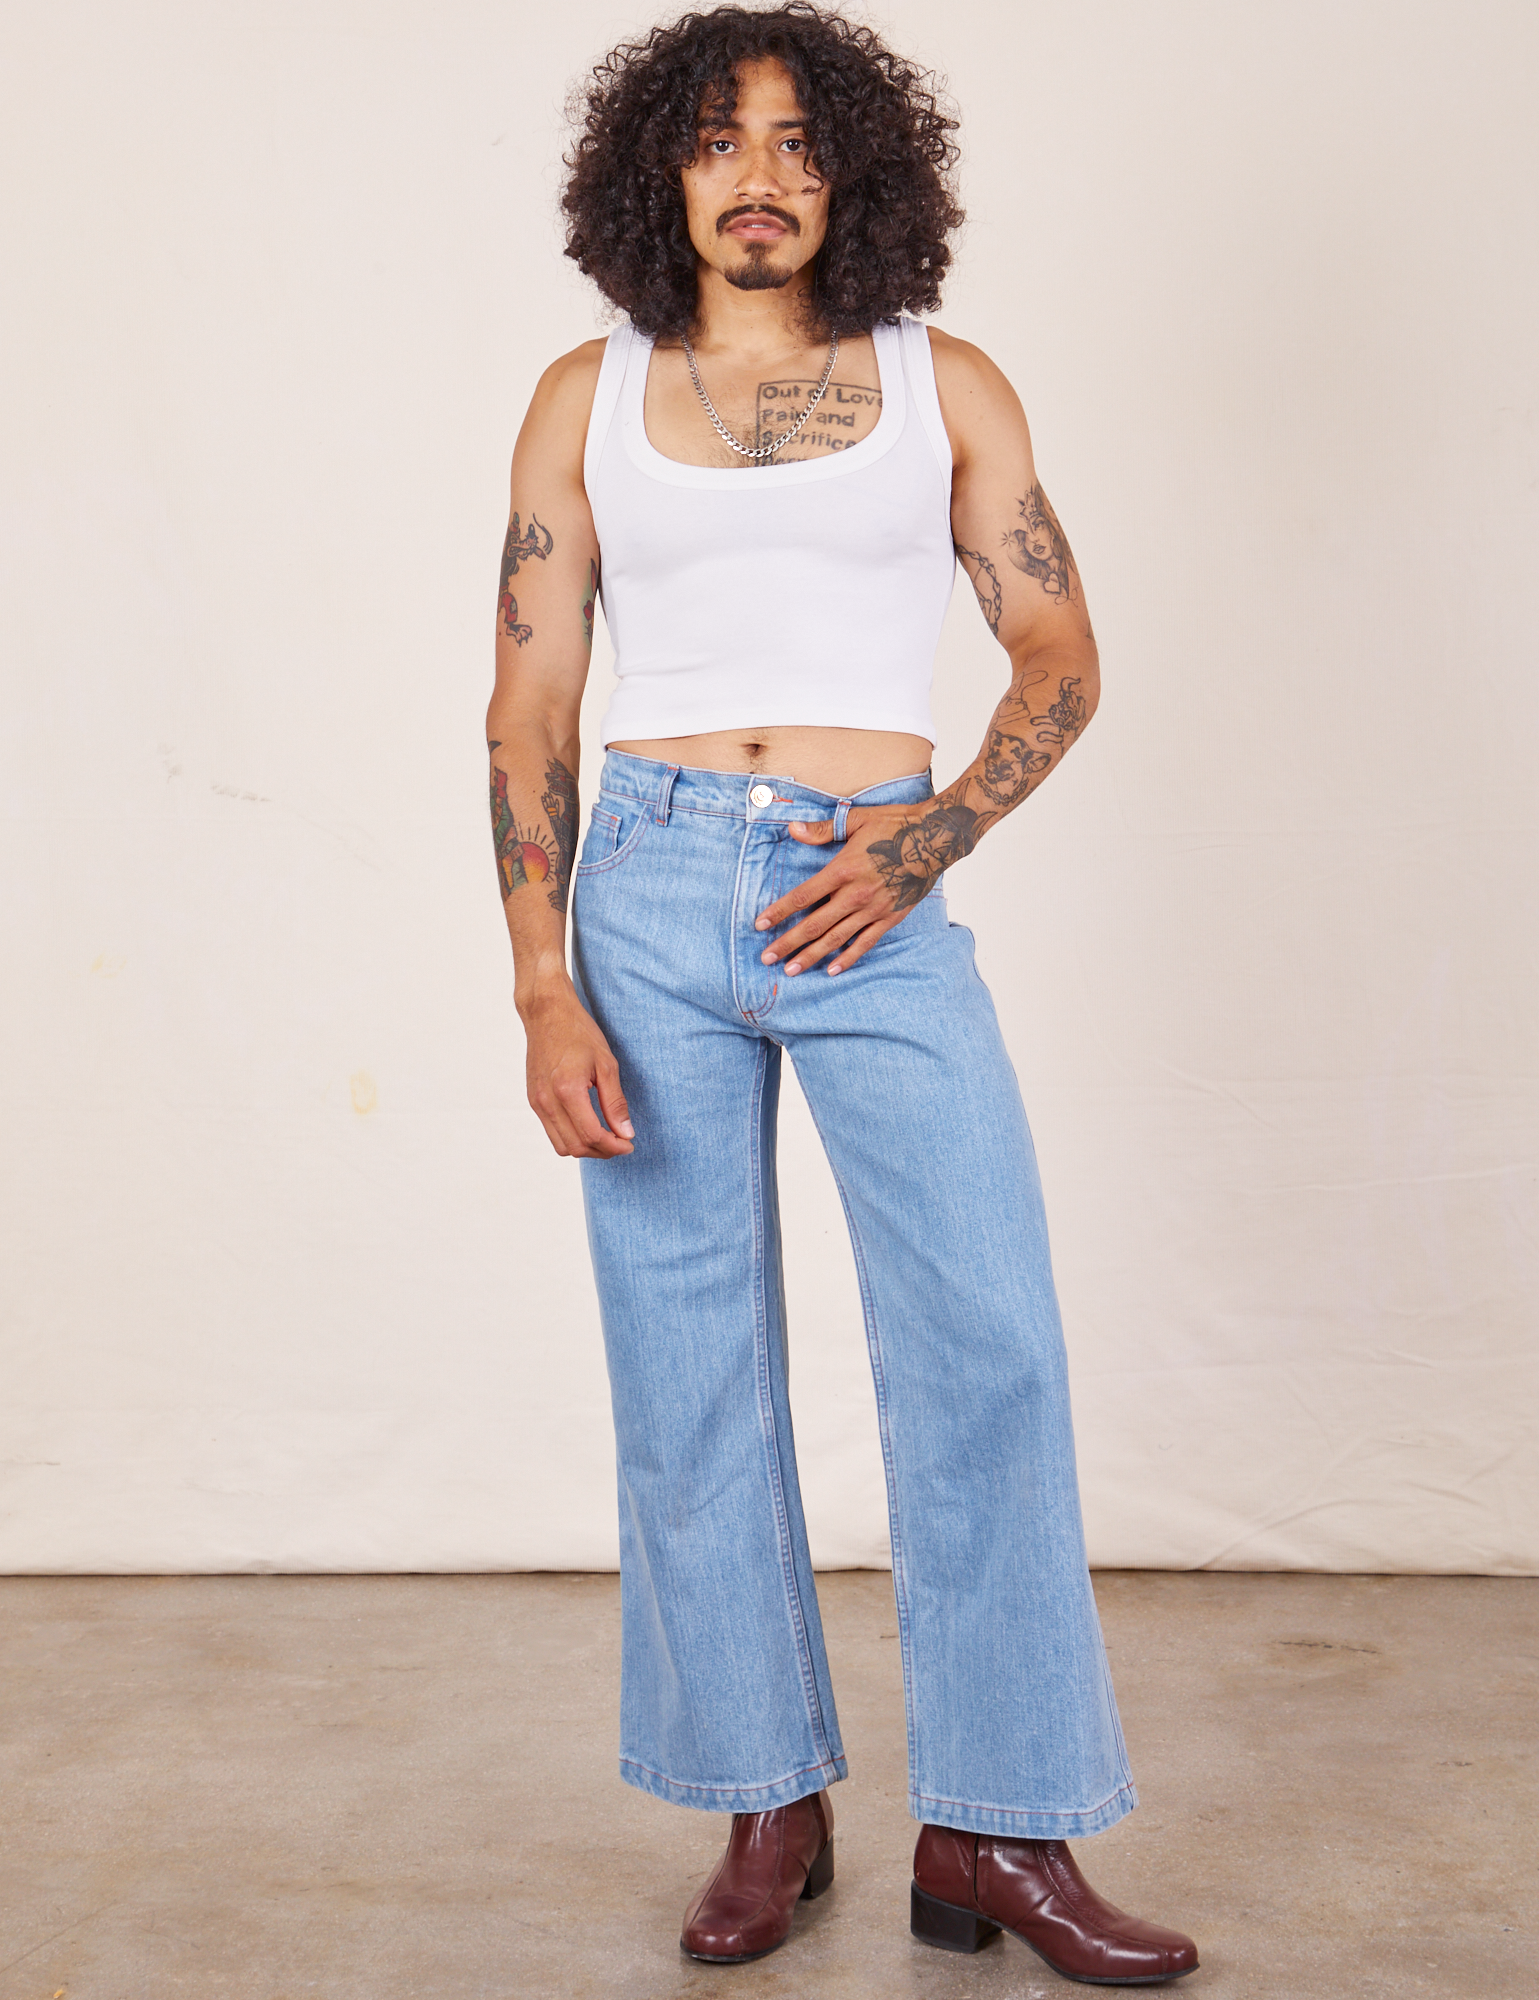 Jesse is wearing Cropped Tank Top in Vintage Tee Off-White paired with light wash Sailor Jeans